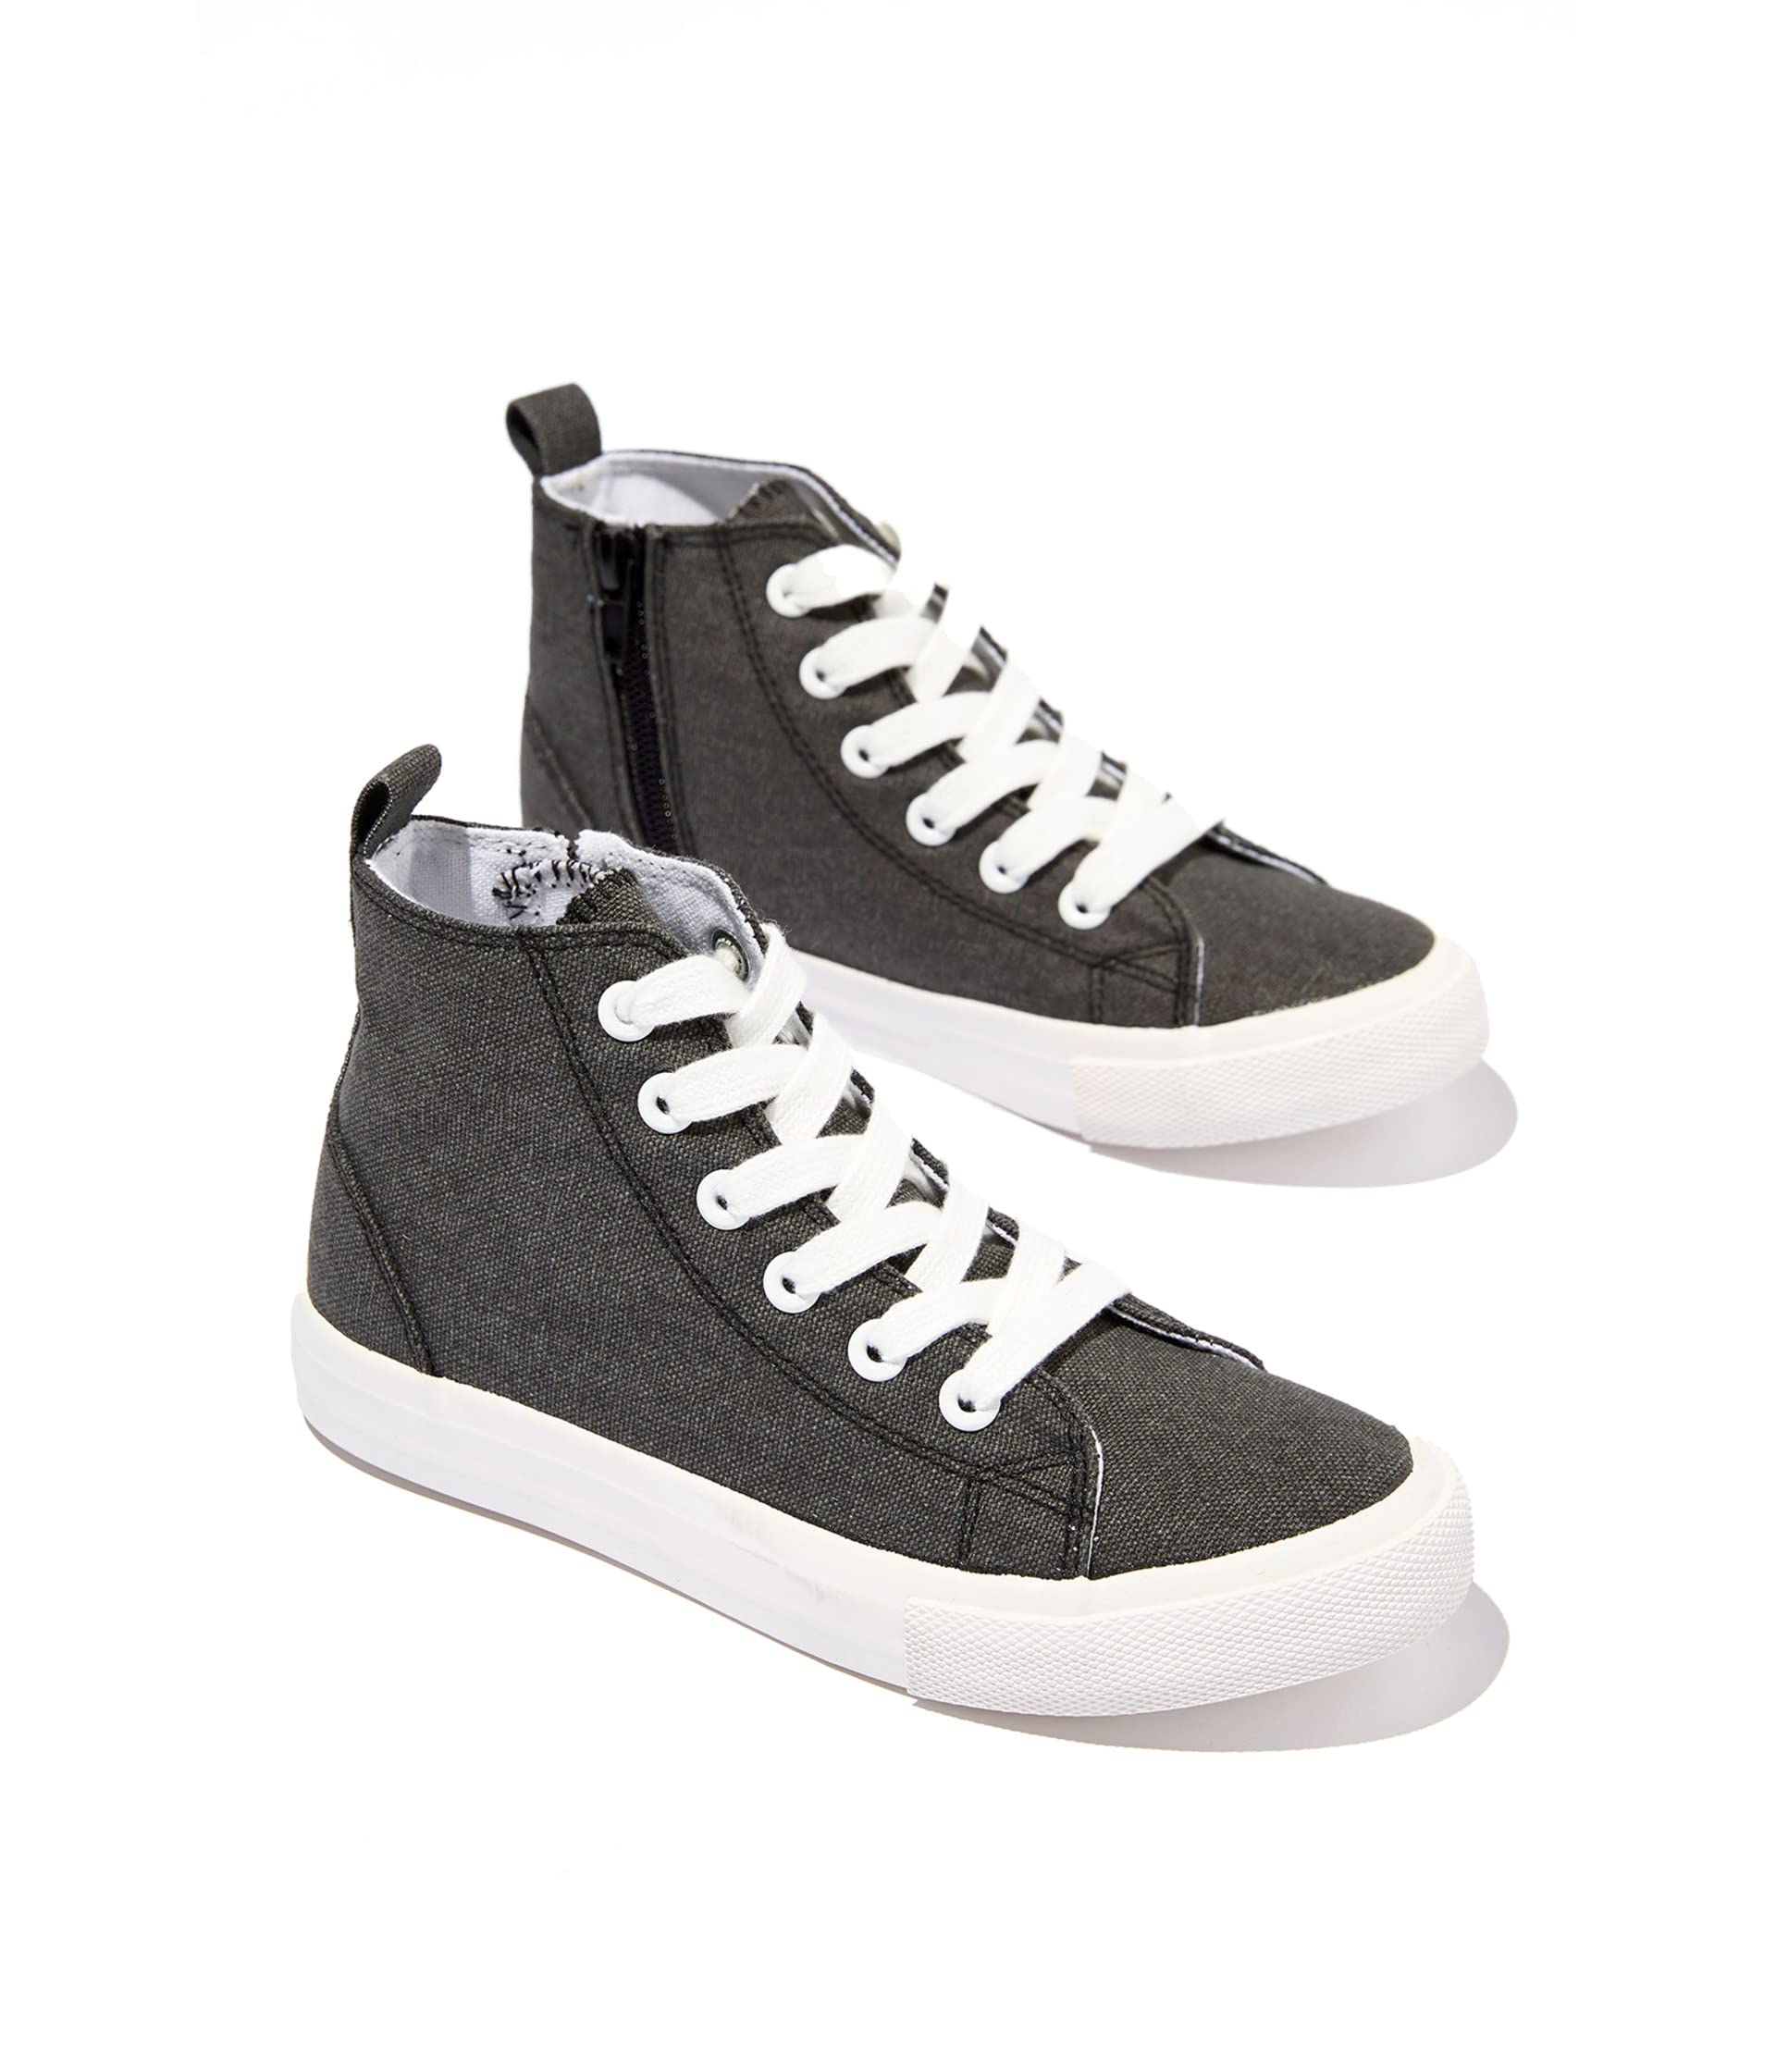 Кроссовки COTTON ON, Classic Canvas High-Top Trainer xl bright white cotton canvas 340 г м2 0 610x15 м 50 8 мм 1207071